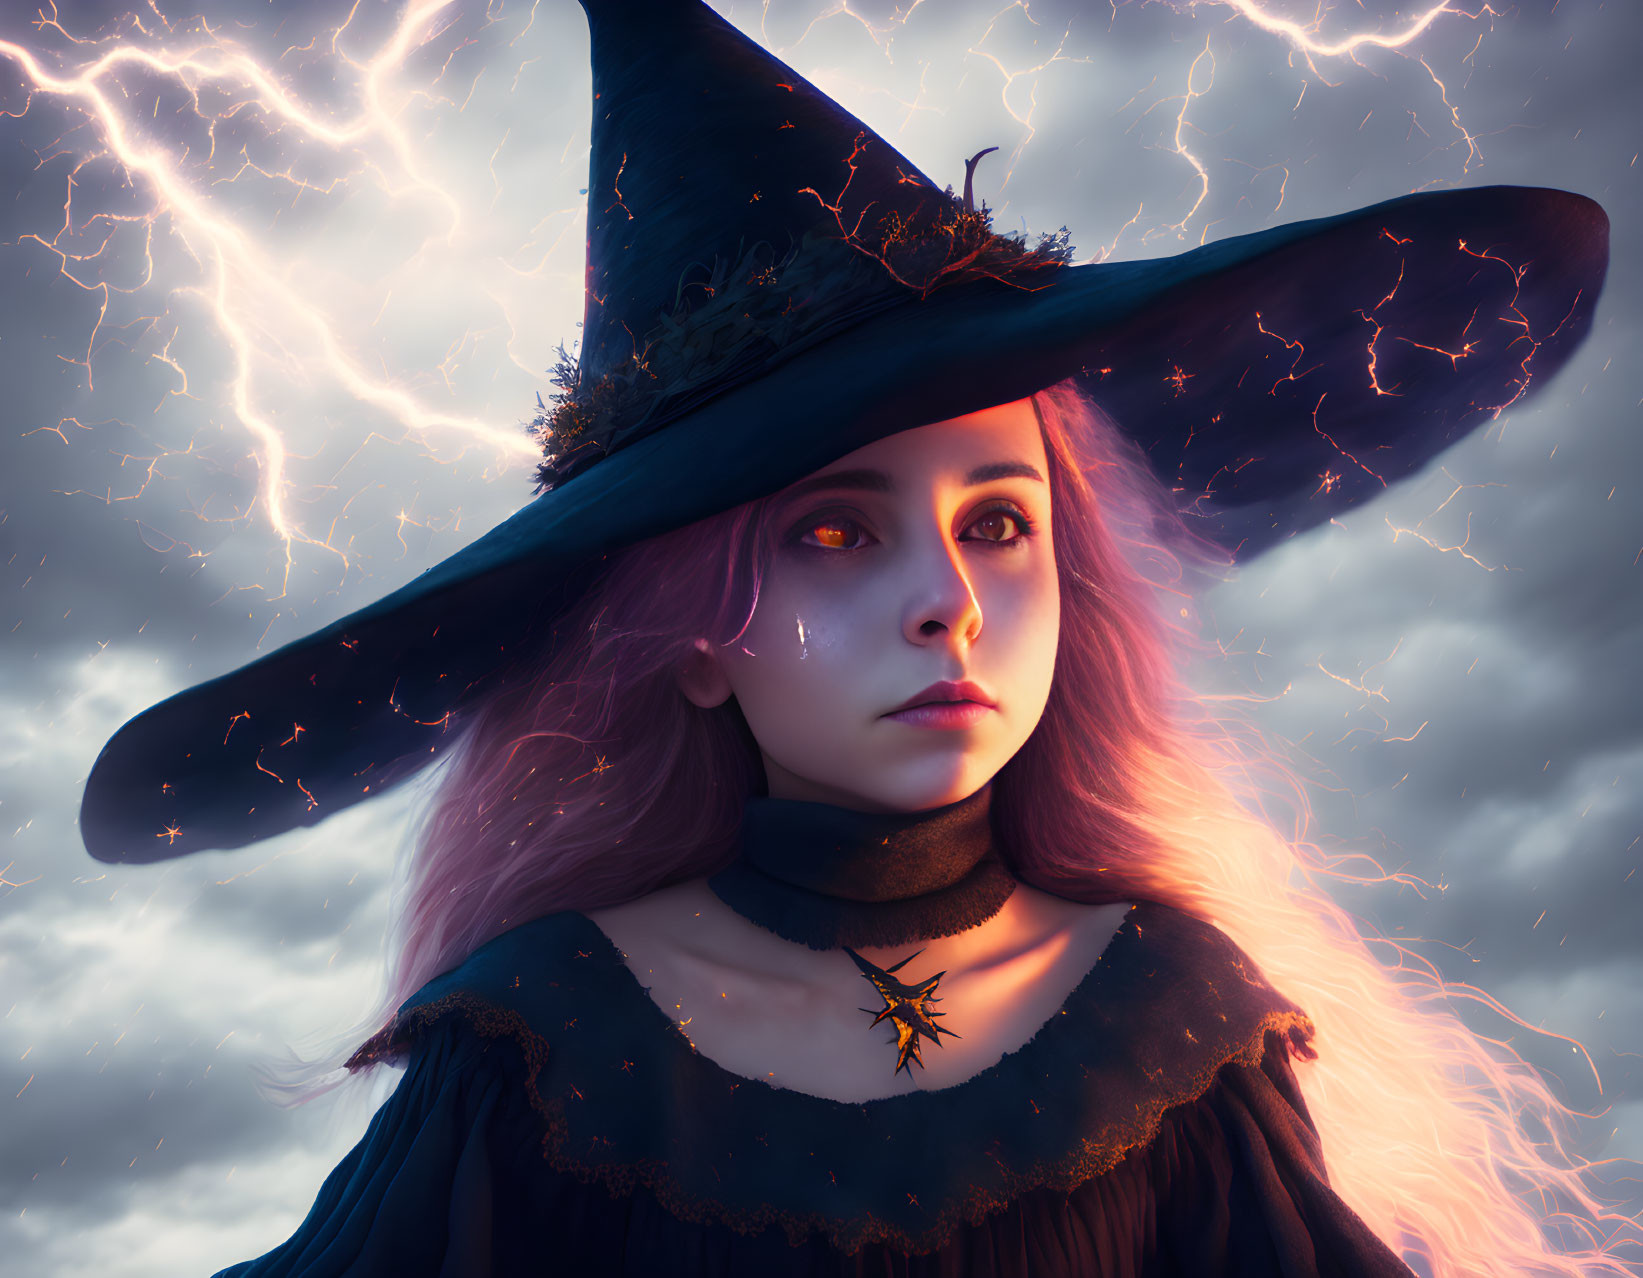 Witch costume with wide-brimmed hat and purple hair in stormy setting